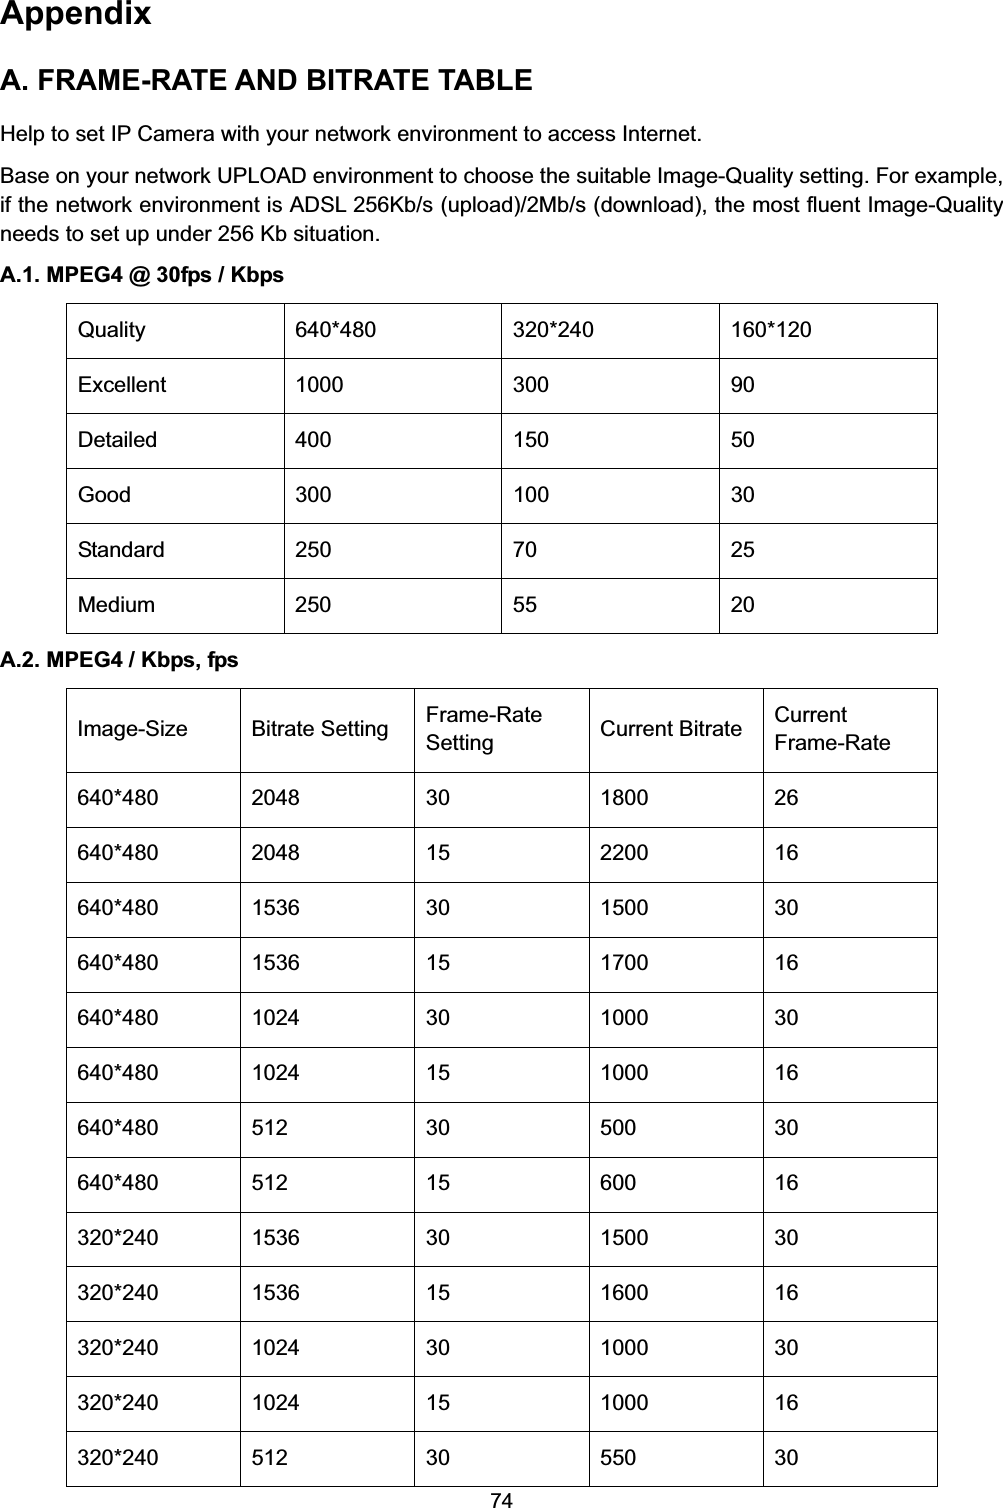  74 Appendix A. FRAME-RATE AND BITRATE TABLE Help to set IP Camera with your network environment to access Internet. Base on your network UPLOAD environment to choose the suitable Image-Quality setting. For example, if the network environment is ADSL 256Kb/s (upload)/2Mb/s (download), the most fluent Image-Quality needs to set up under 256 Kb situation.   A.1. MPEG4 @ 30fps / Kbps Quality 640*480 320*240 160*120 Excellent 1000  300  90 Detailed 400  150  50 Good 300  100  30 Standard 250  70  25 Medium 250  55  20 A.2. MPEG4 / Kbps, fps Image-Size Bitrate Setting Frame-Rate Setting  Current Bitrate  Current Frame-Rate 640*480 2048  30  1800  26 640*480 2048  15  2200  16 640*480 1536  30  1500  30 640*480 1536  15  1700  16 640*480 1024  30  1000  30 640*480 1024  15  1000  16 640*480 512  30  500  30 640*480 512  15  600  16 320*240 1536  30  1500  30 320*240 1536  15  1600  16 320*240 1024  30  1000  30 320*240 1024  15  1000  16 320*240 512  30  550  30 